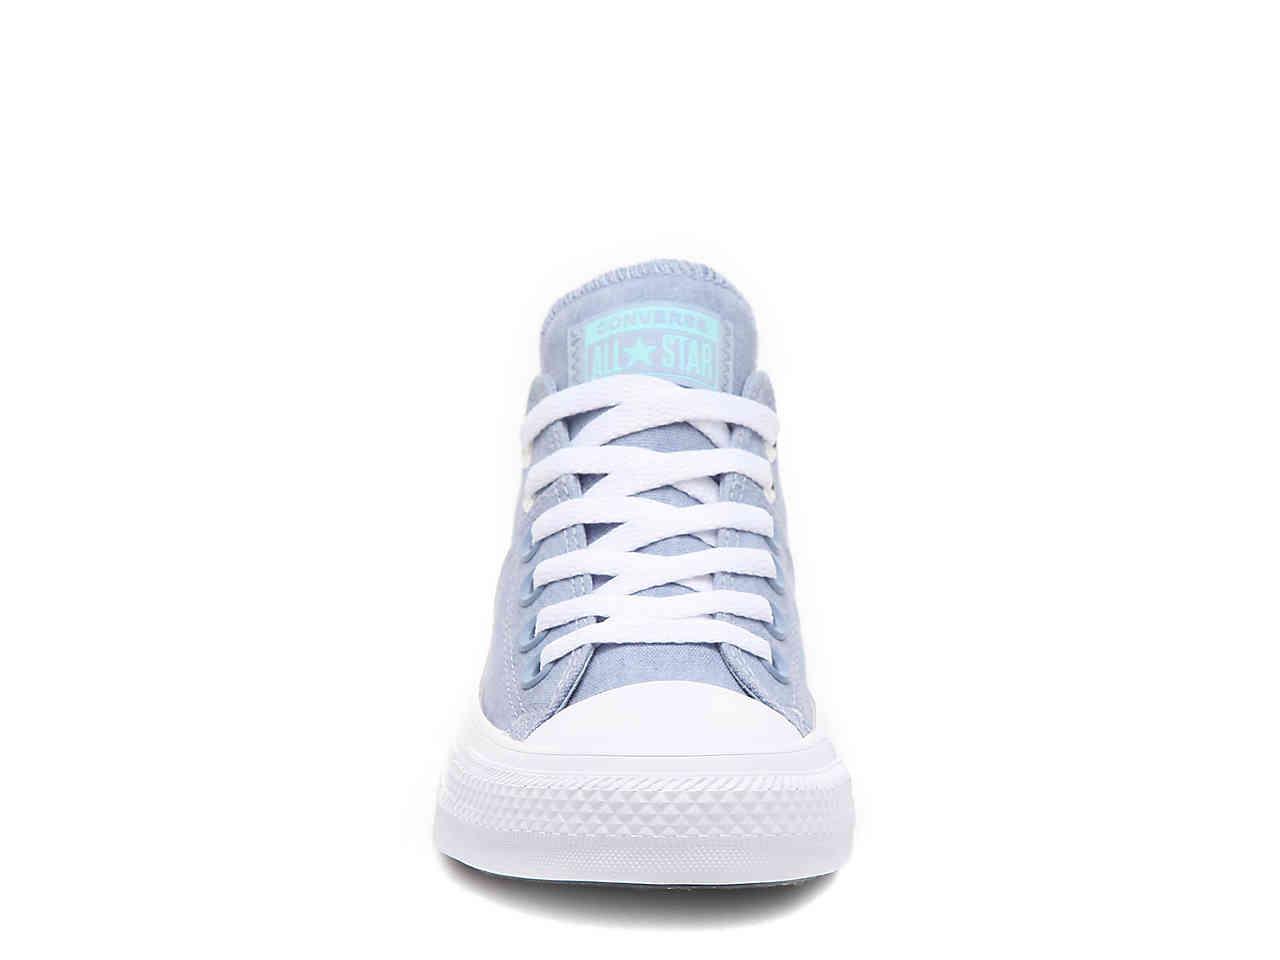 Converse Chuck Taylor All Star Madison Sneaker in Blue | Lyst